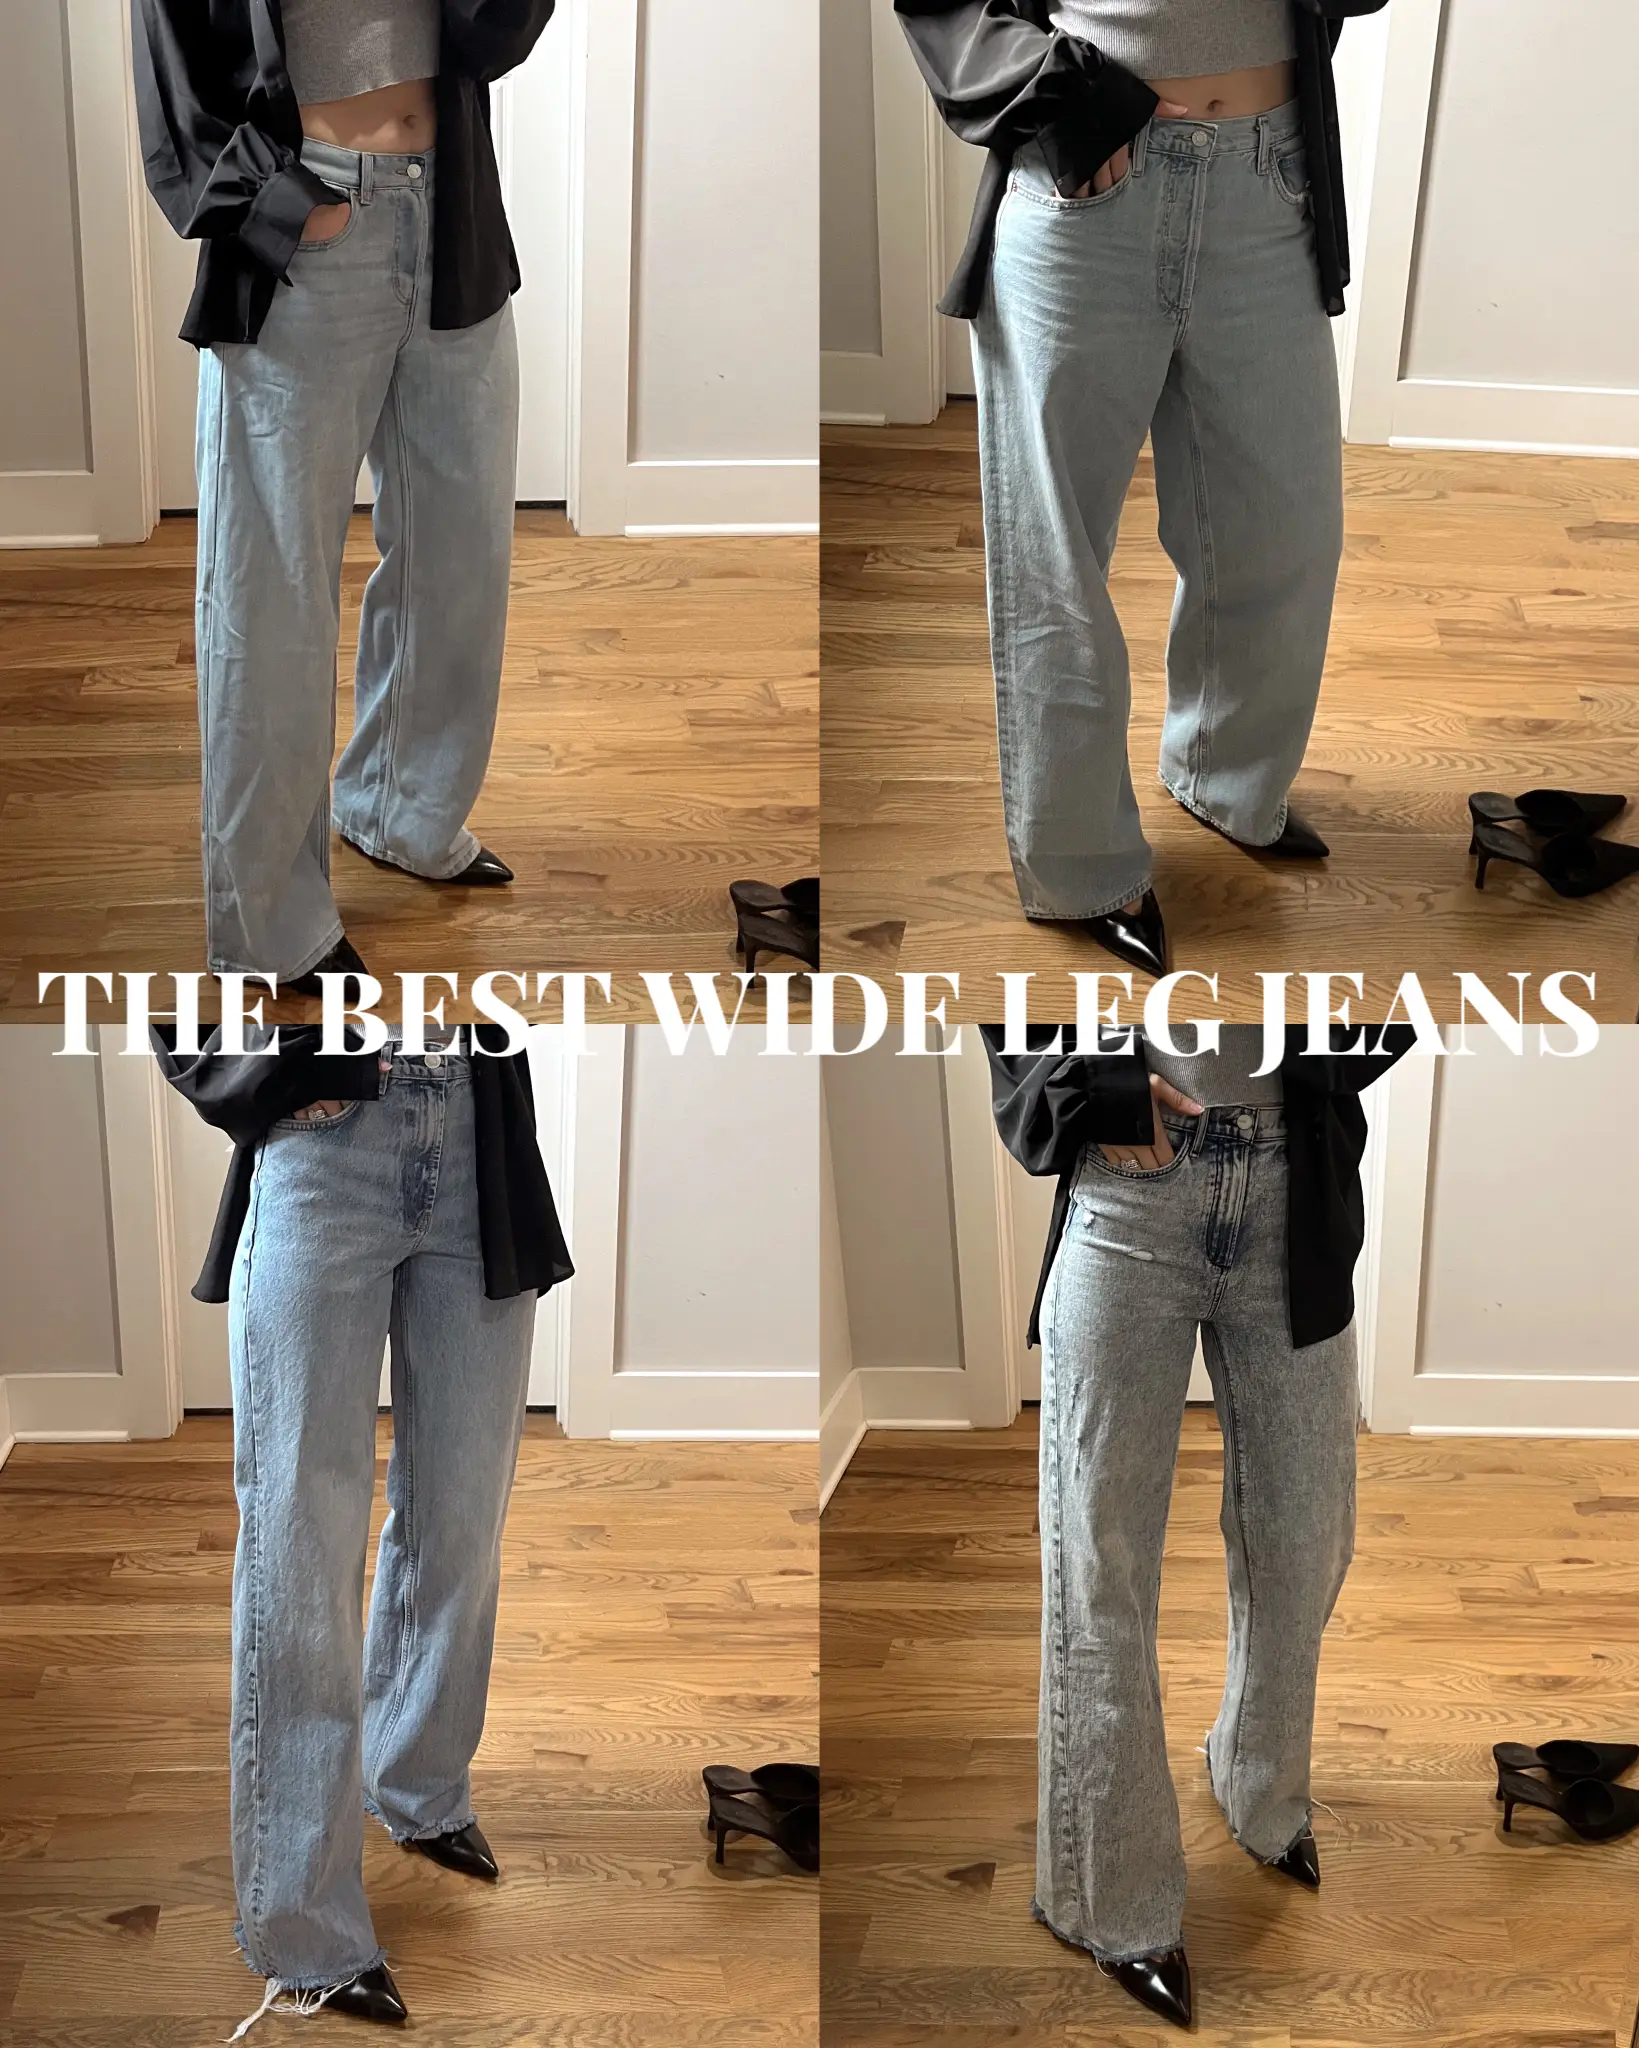 Agolde Criss Cross Jeans Review - Modernly Michelle